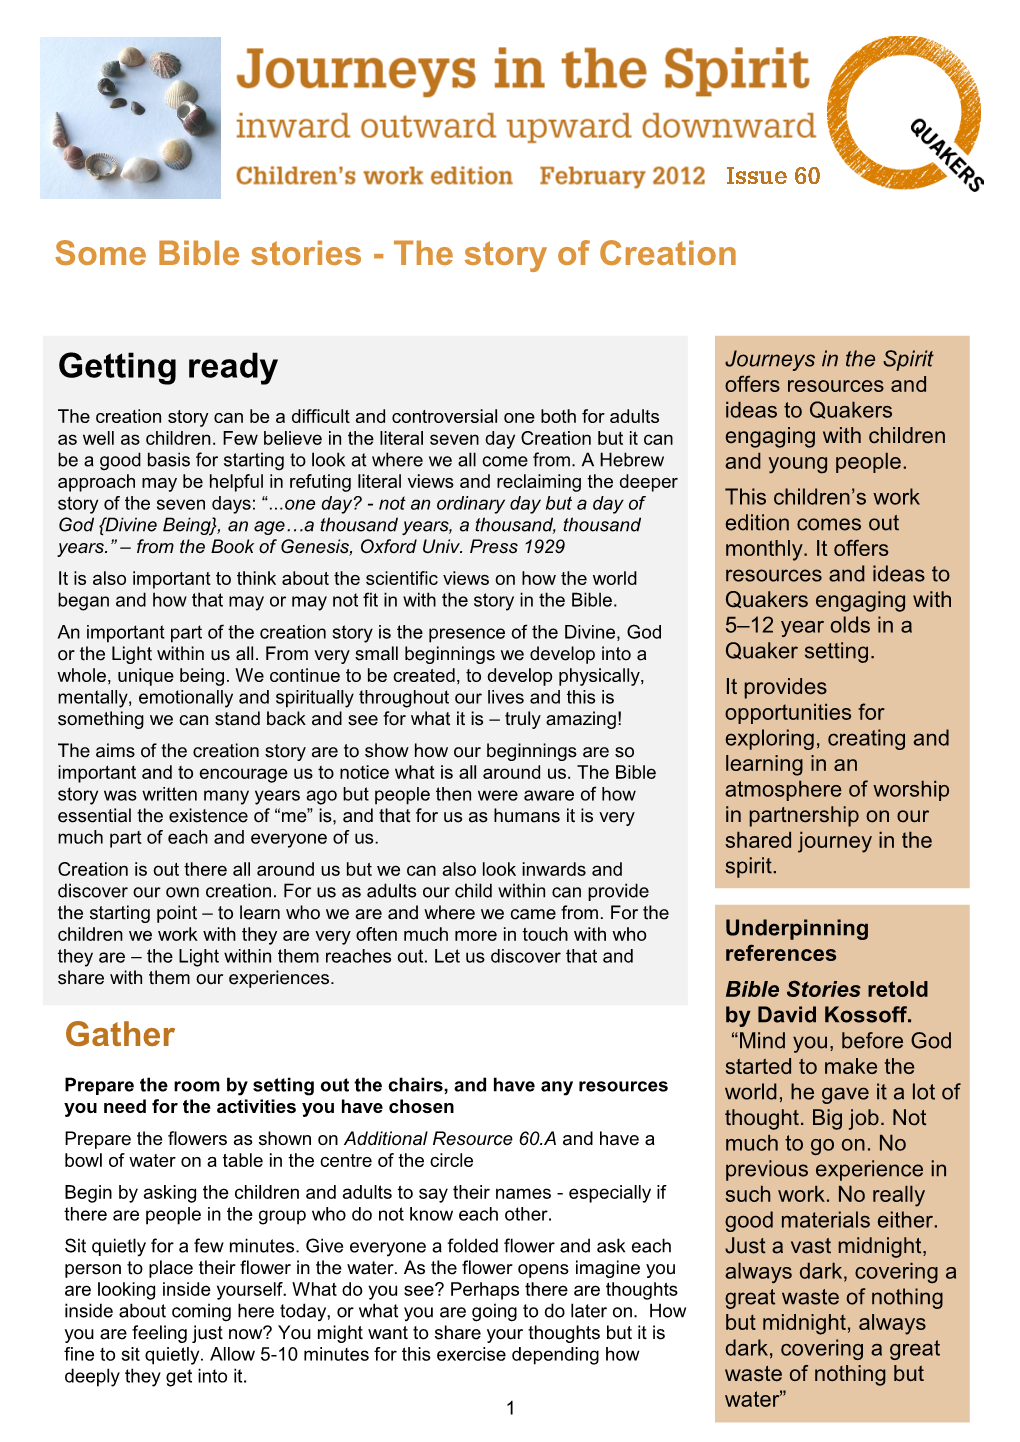 Some Bible Stories - the Story of Creation